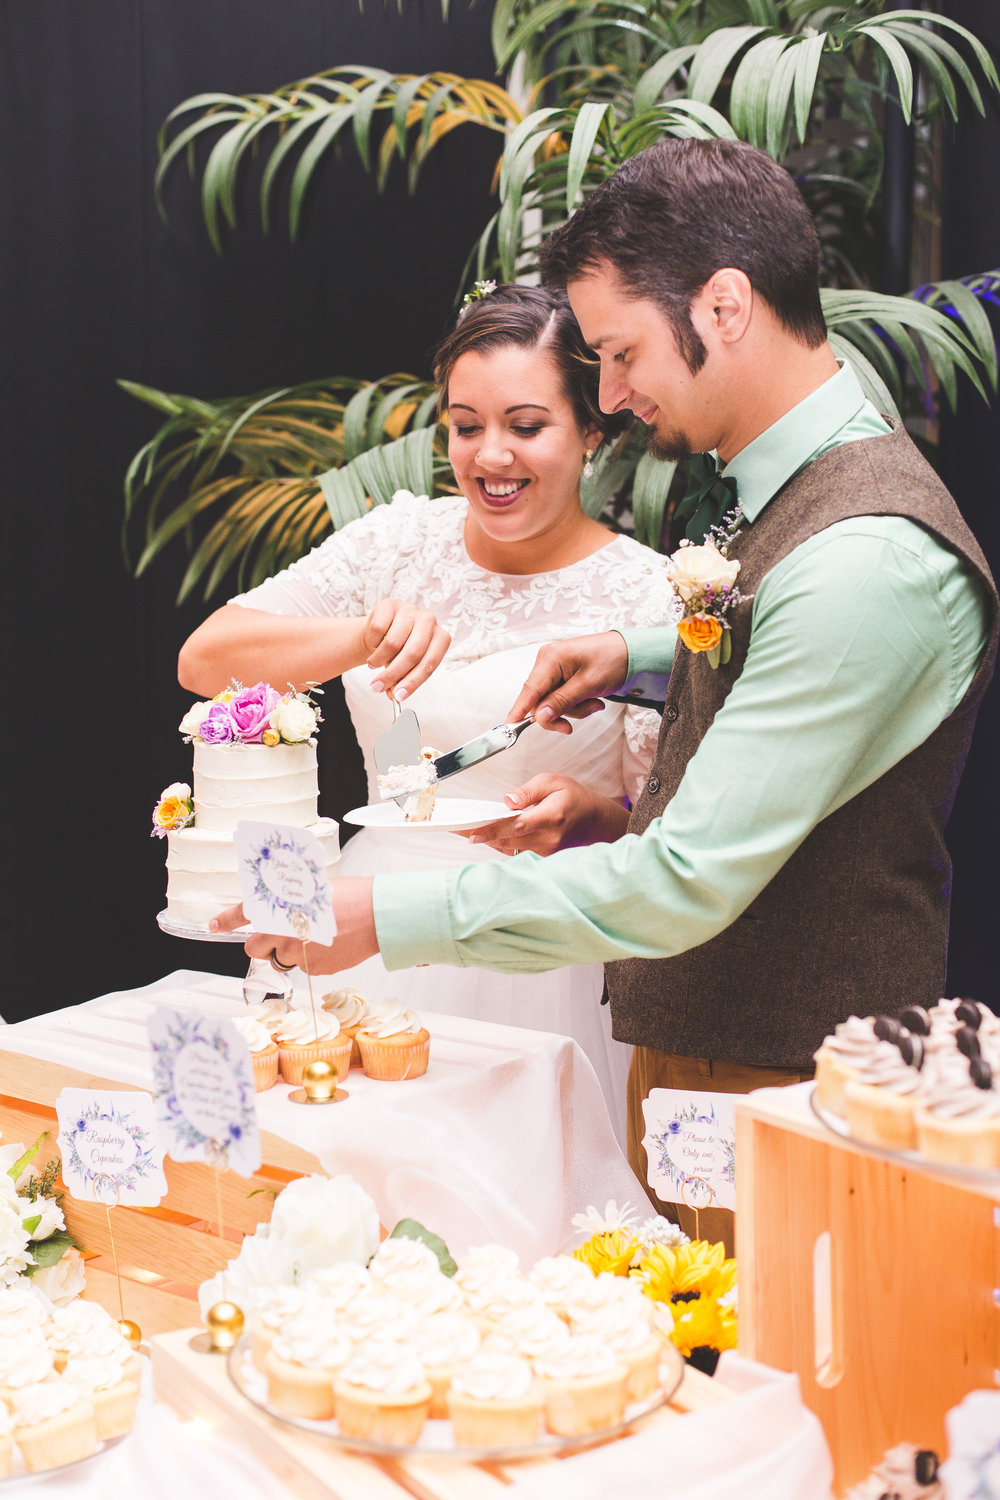 Bride and Groom cutting cake 